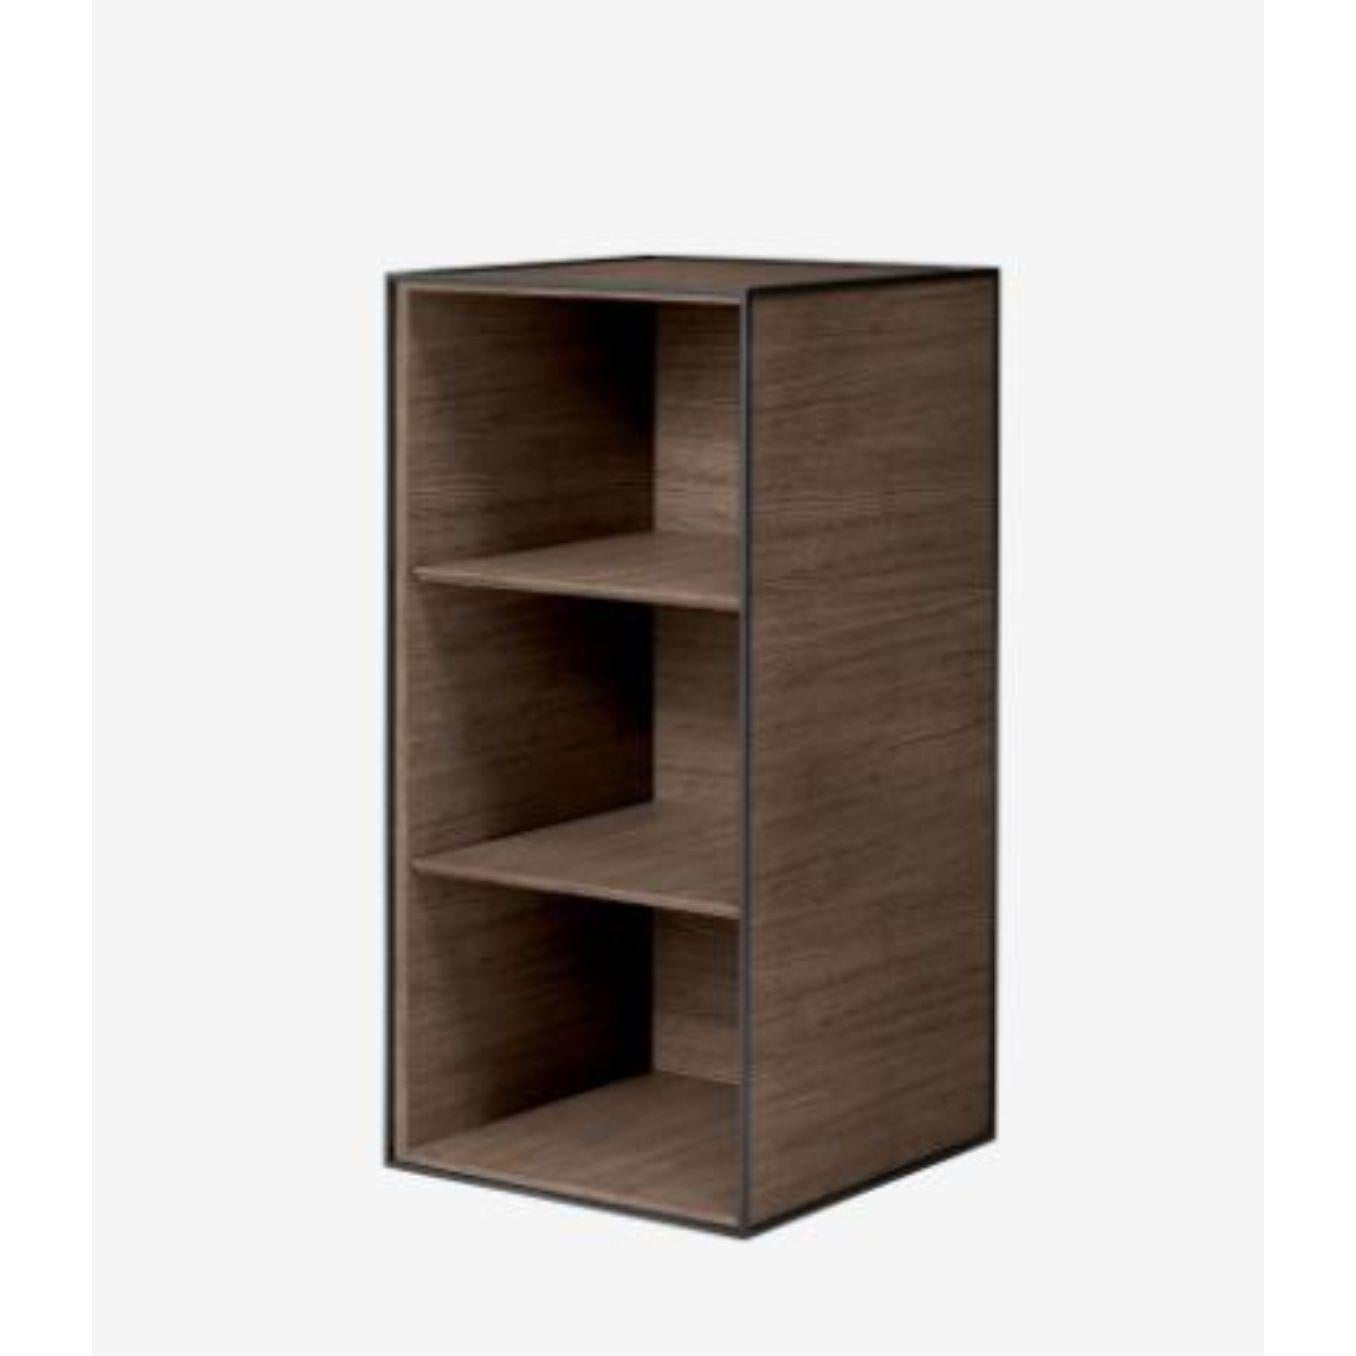 70 black ash frame box with 2 shelves by Lassen.
Dimensions: D 35 x W 35 x H 70 cm. 
Materials: Finér, Melamin, Melamin, Melamine, Metal, Veneer, Oak.
Also available in different colors and dimensions.
Weight: 13 Kg


By Lassen is a Danish